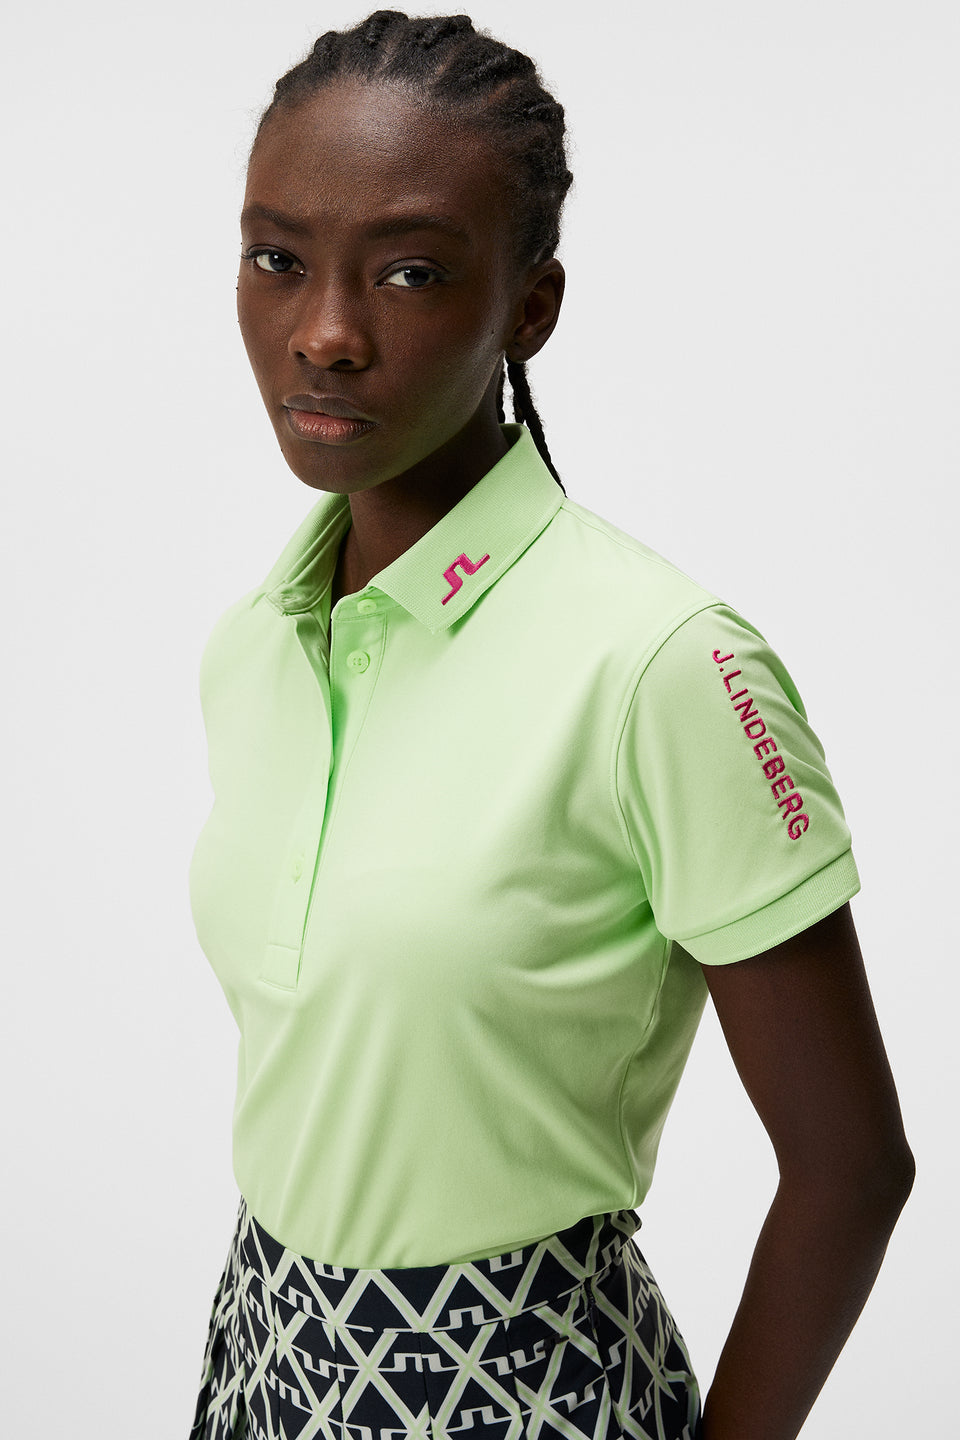 Modern Golf Clothing for Women - J.Lindeberg – Page 3